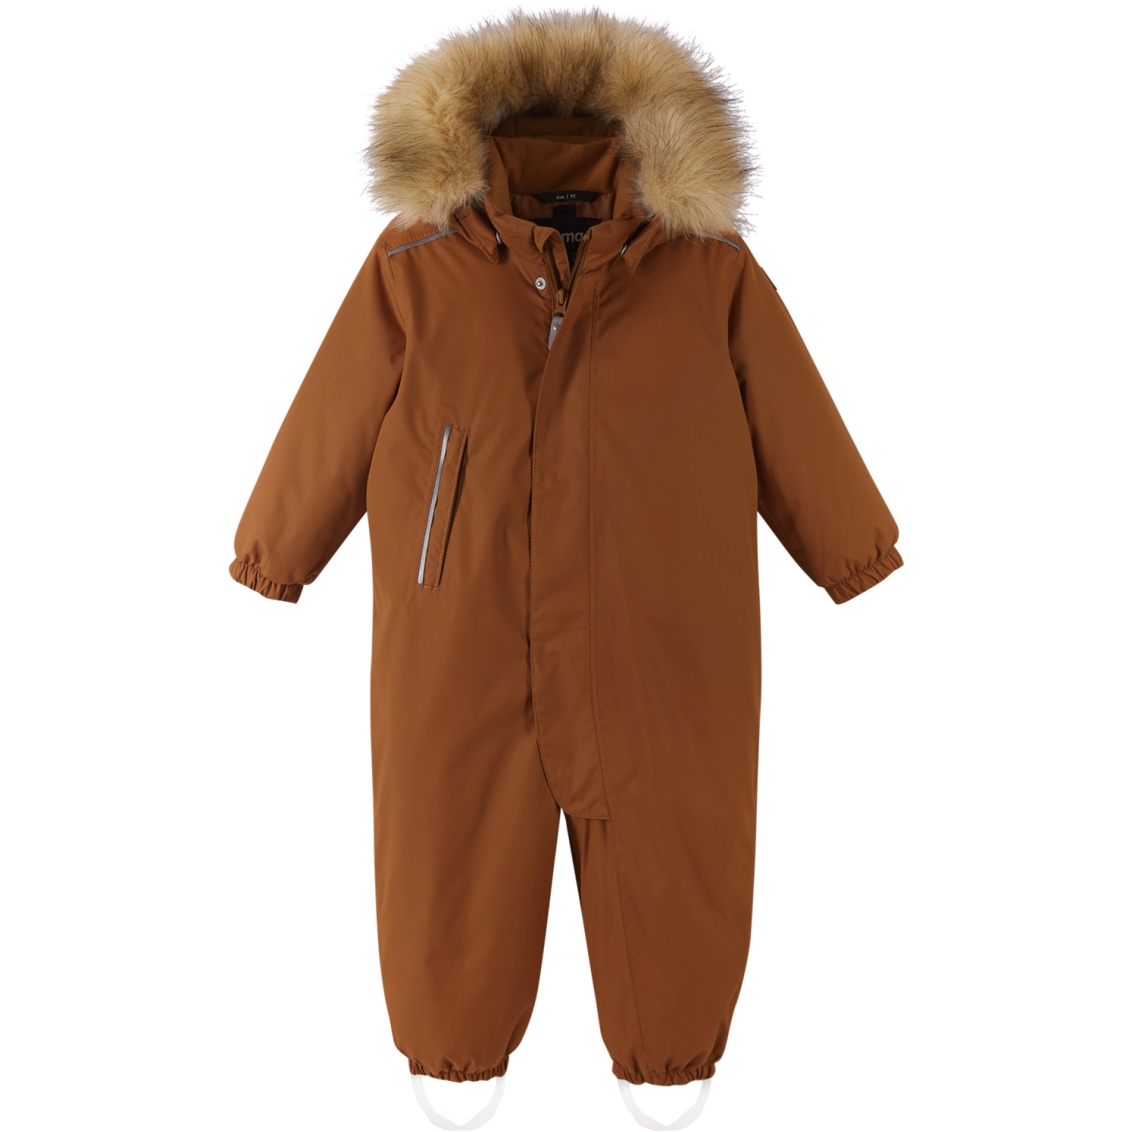 Picture of Reima Gotland Winter Overall Toddler - cinnamon brown 1490